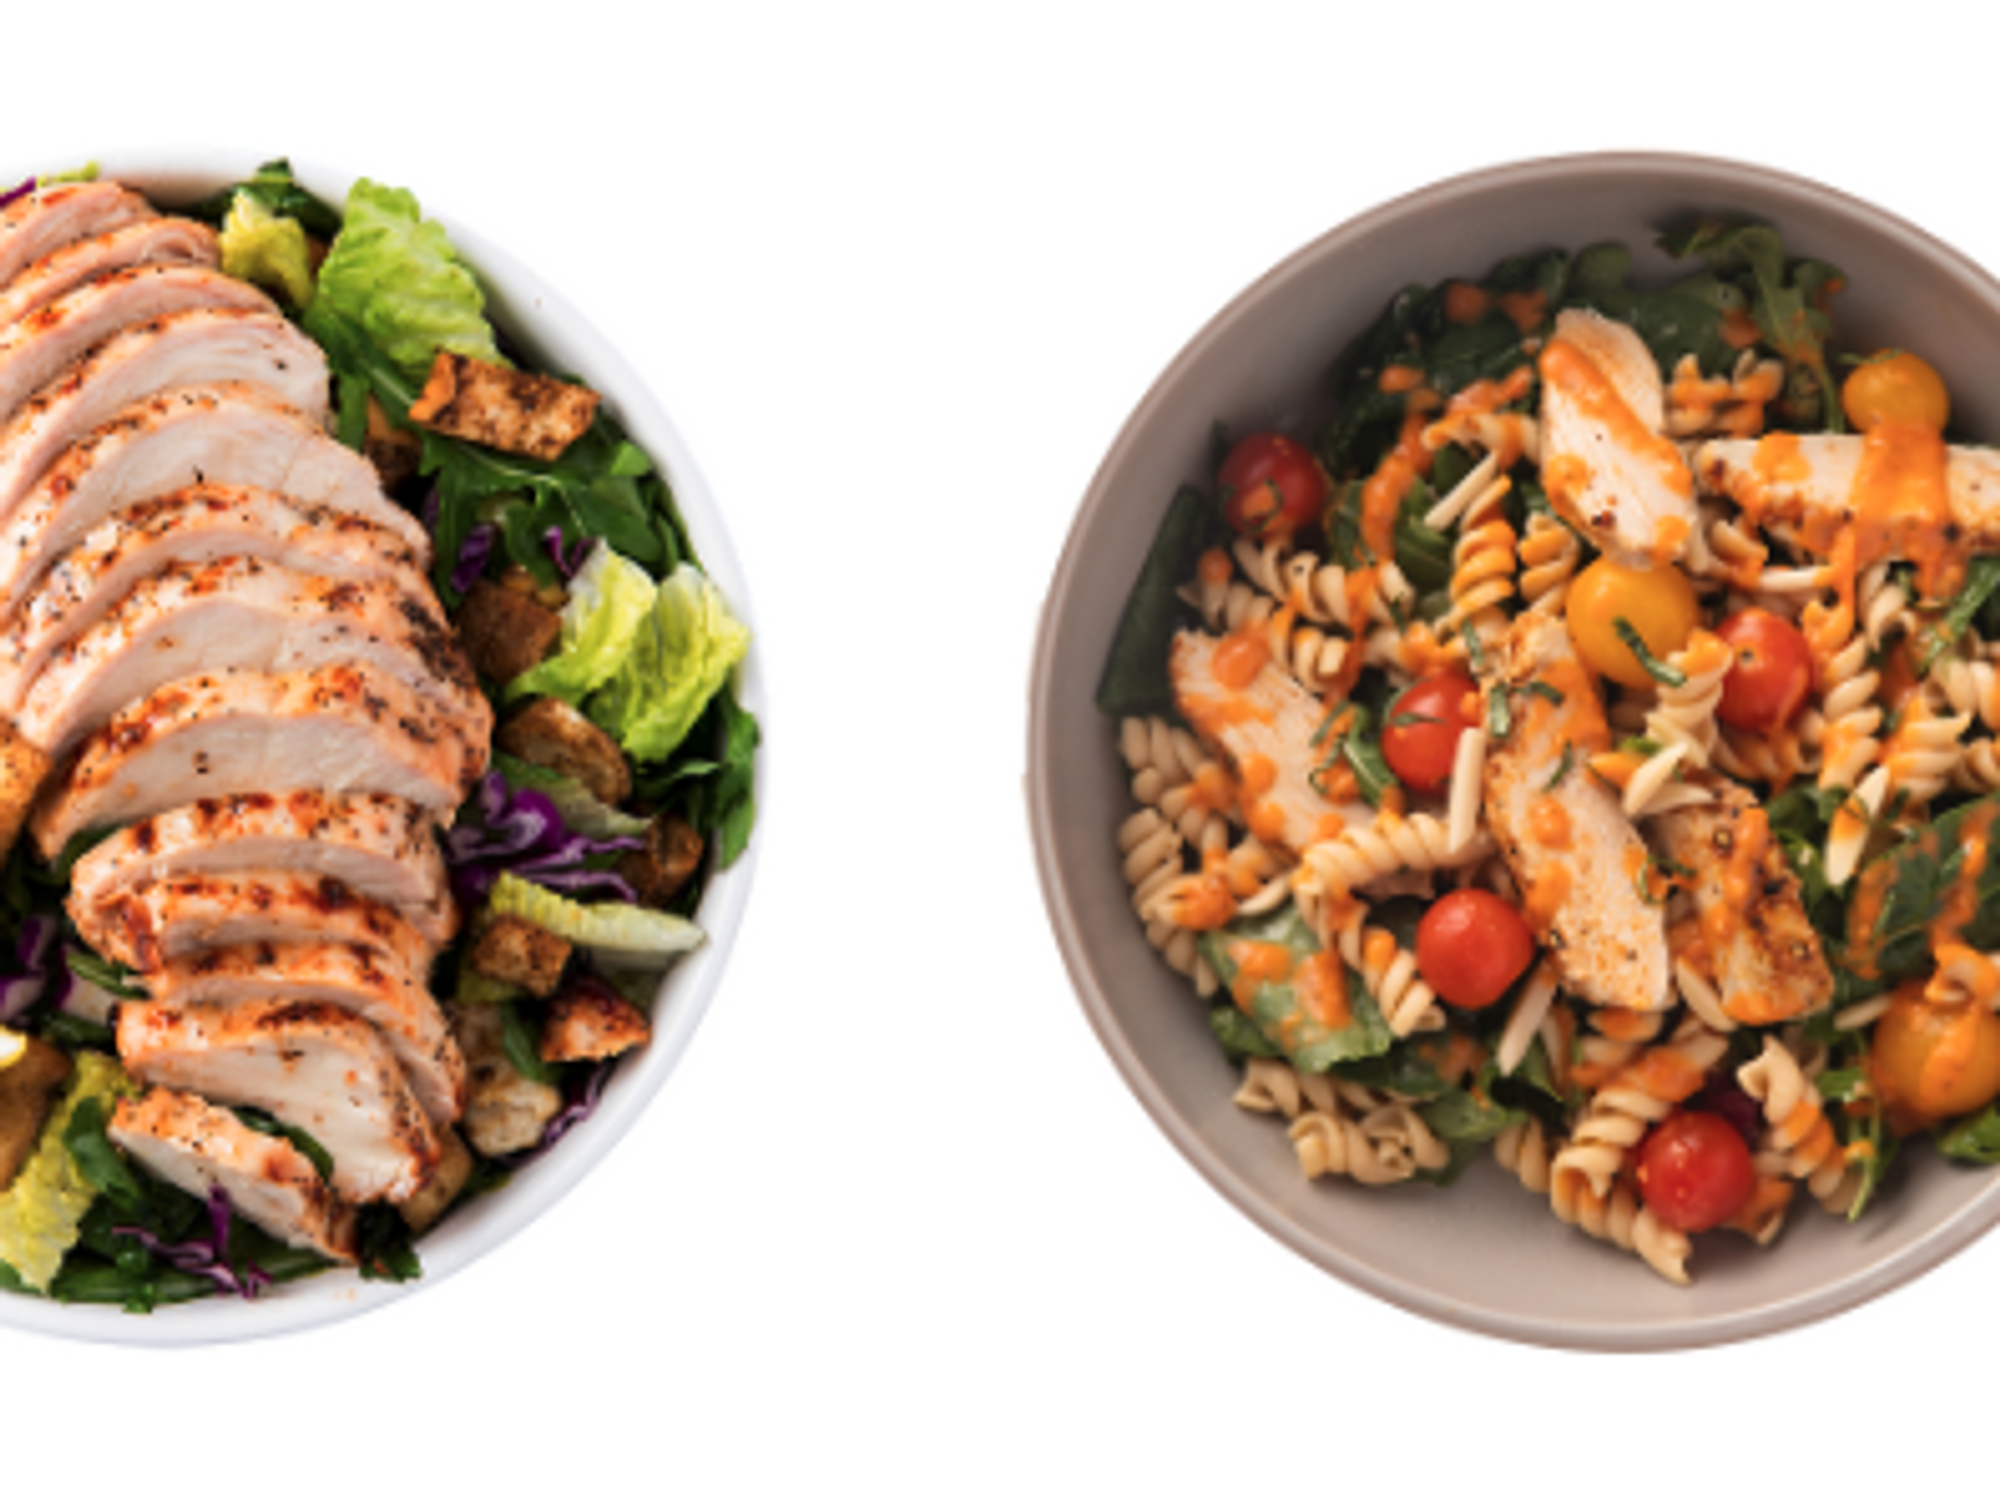 Everytable Wants to Make Healthy, Fast Food Affordable. The Startup Lands $16M